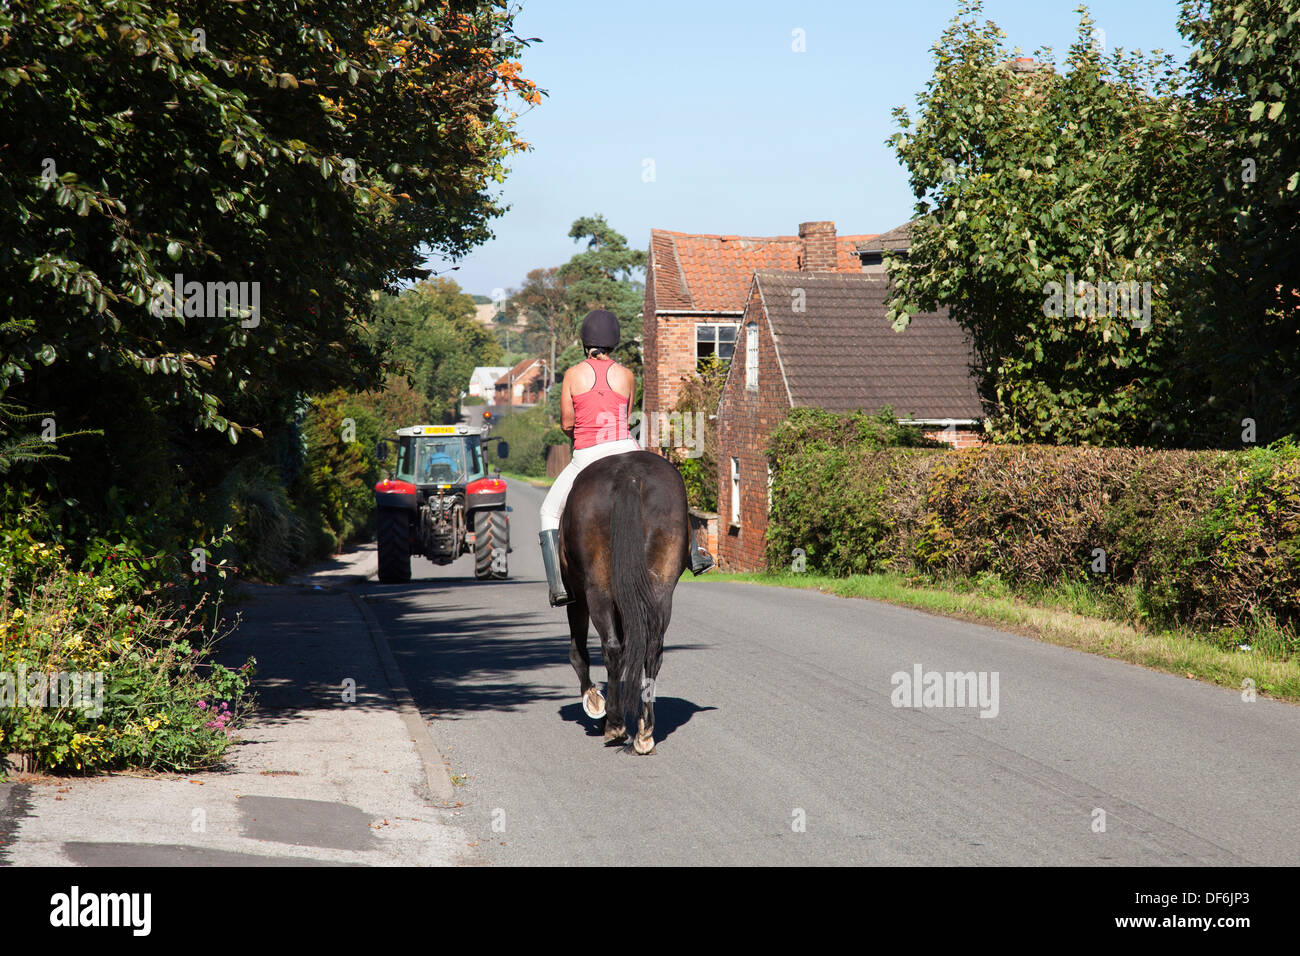 A horse and rider on a rural road in the U.K. Stock Photo